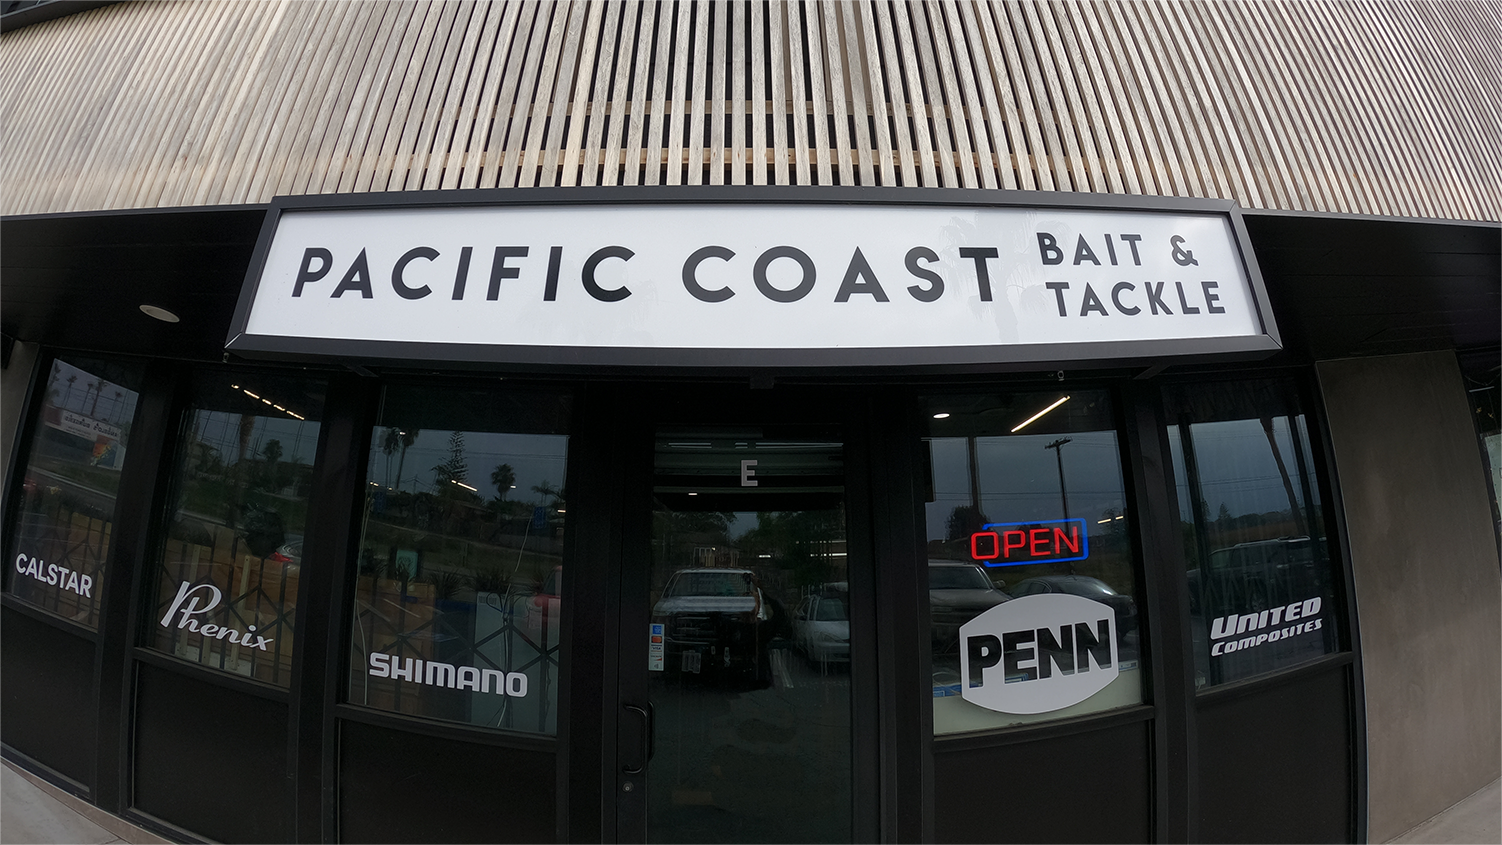 Pacific Coast Bait and Tackle